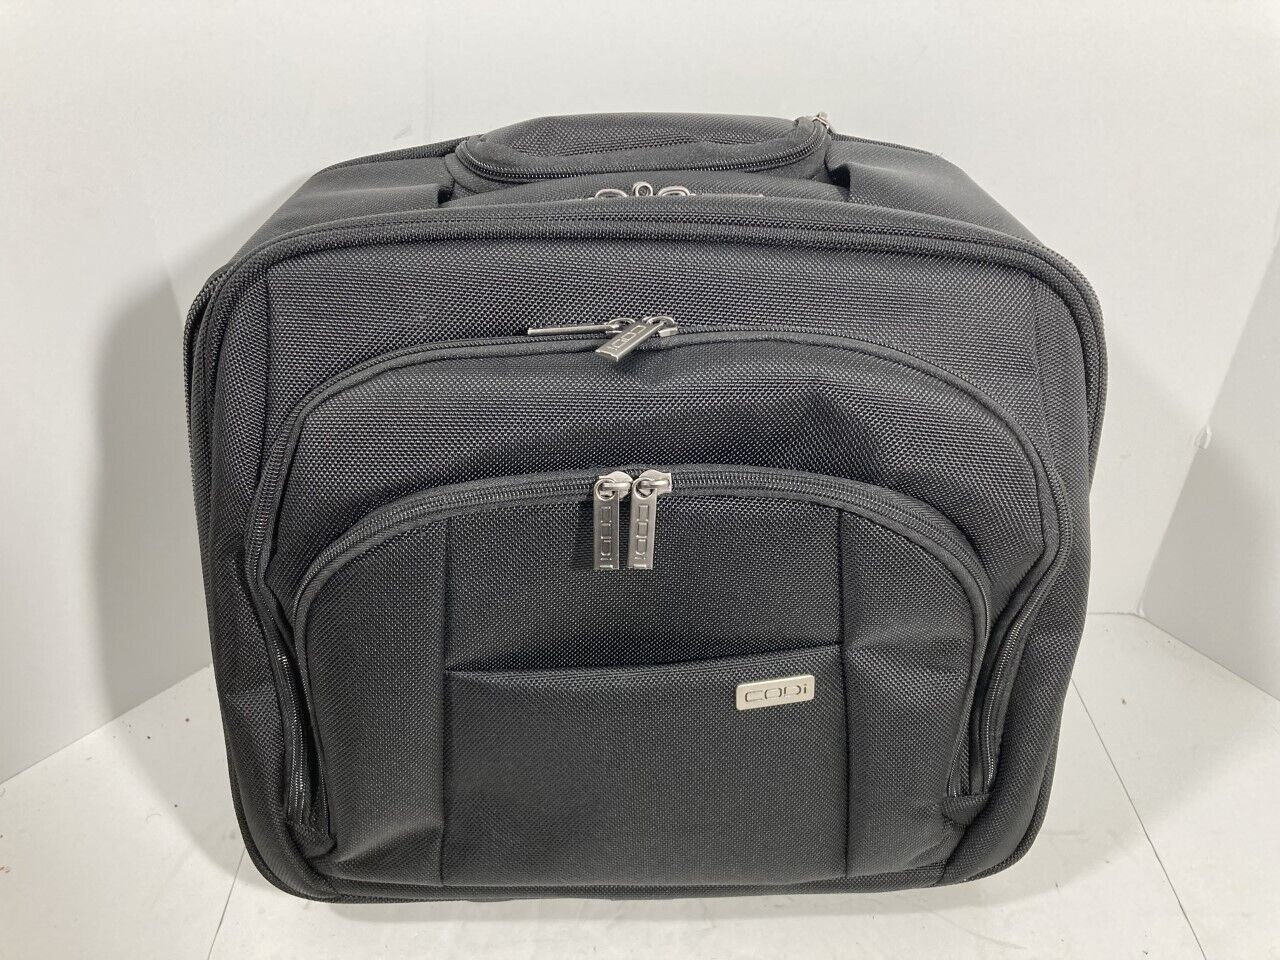 New Without Tags Codi Rolling Laptop Computer Business Travel Bag 15”x12”x7”